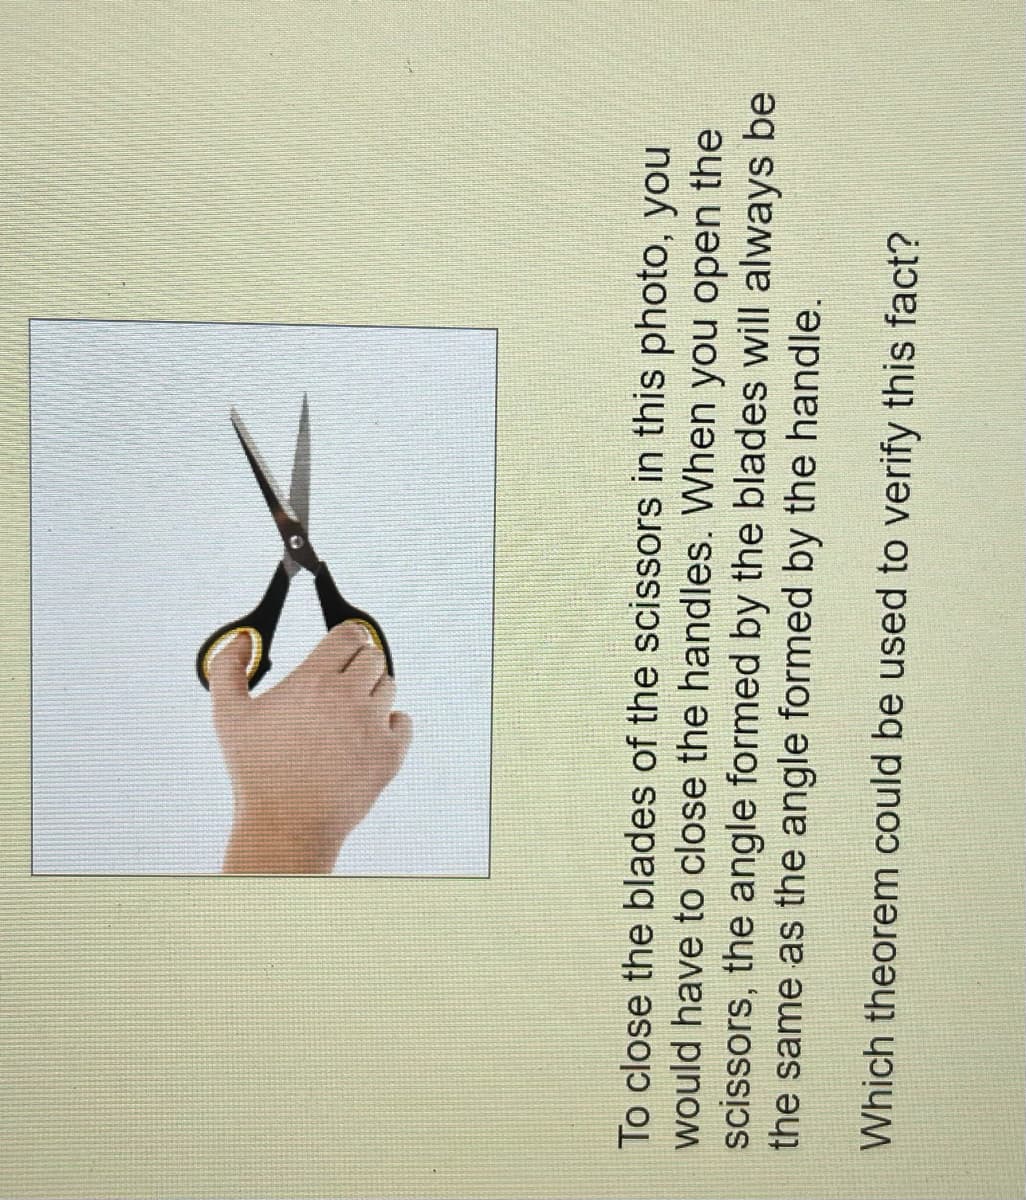 To close the blades of the scissors in this photo, you
would have to close the handles. When you open the
scissors, the angle formed by the blades will always be
the same as the angle formed by the handle.
Which theorem could be used to verify this fact?
